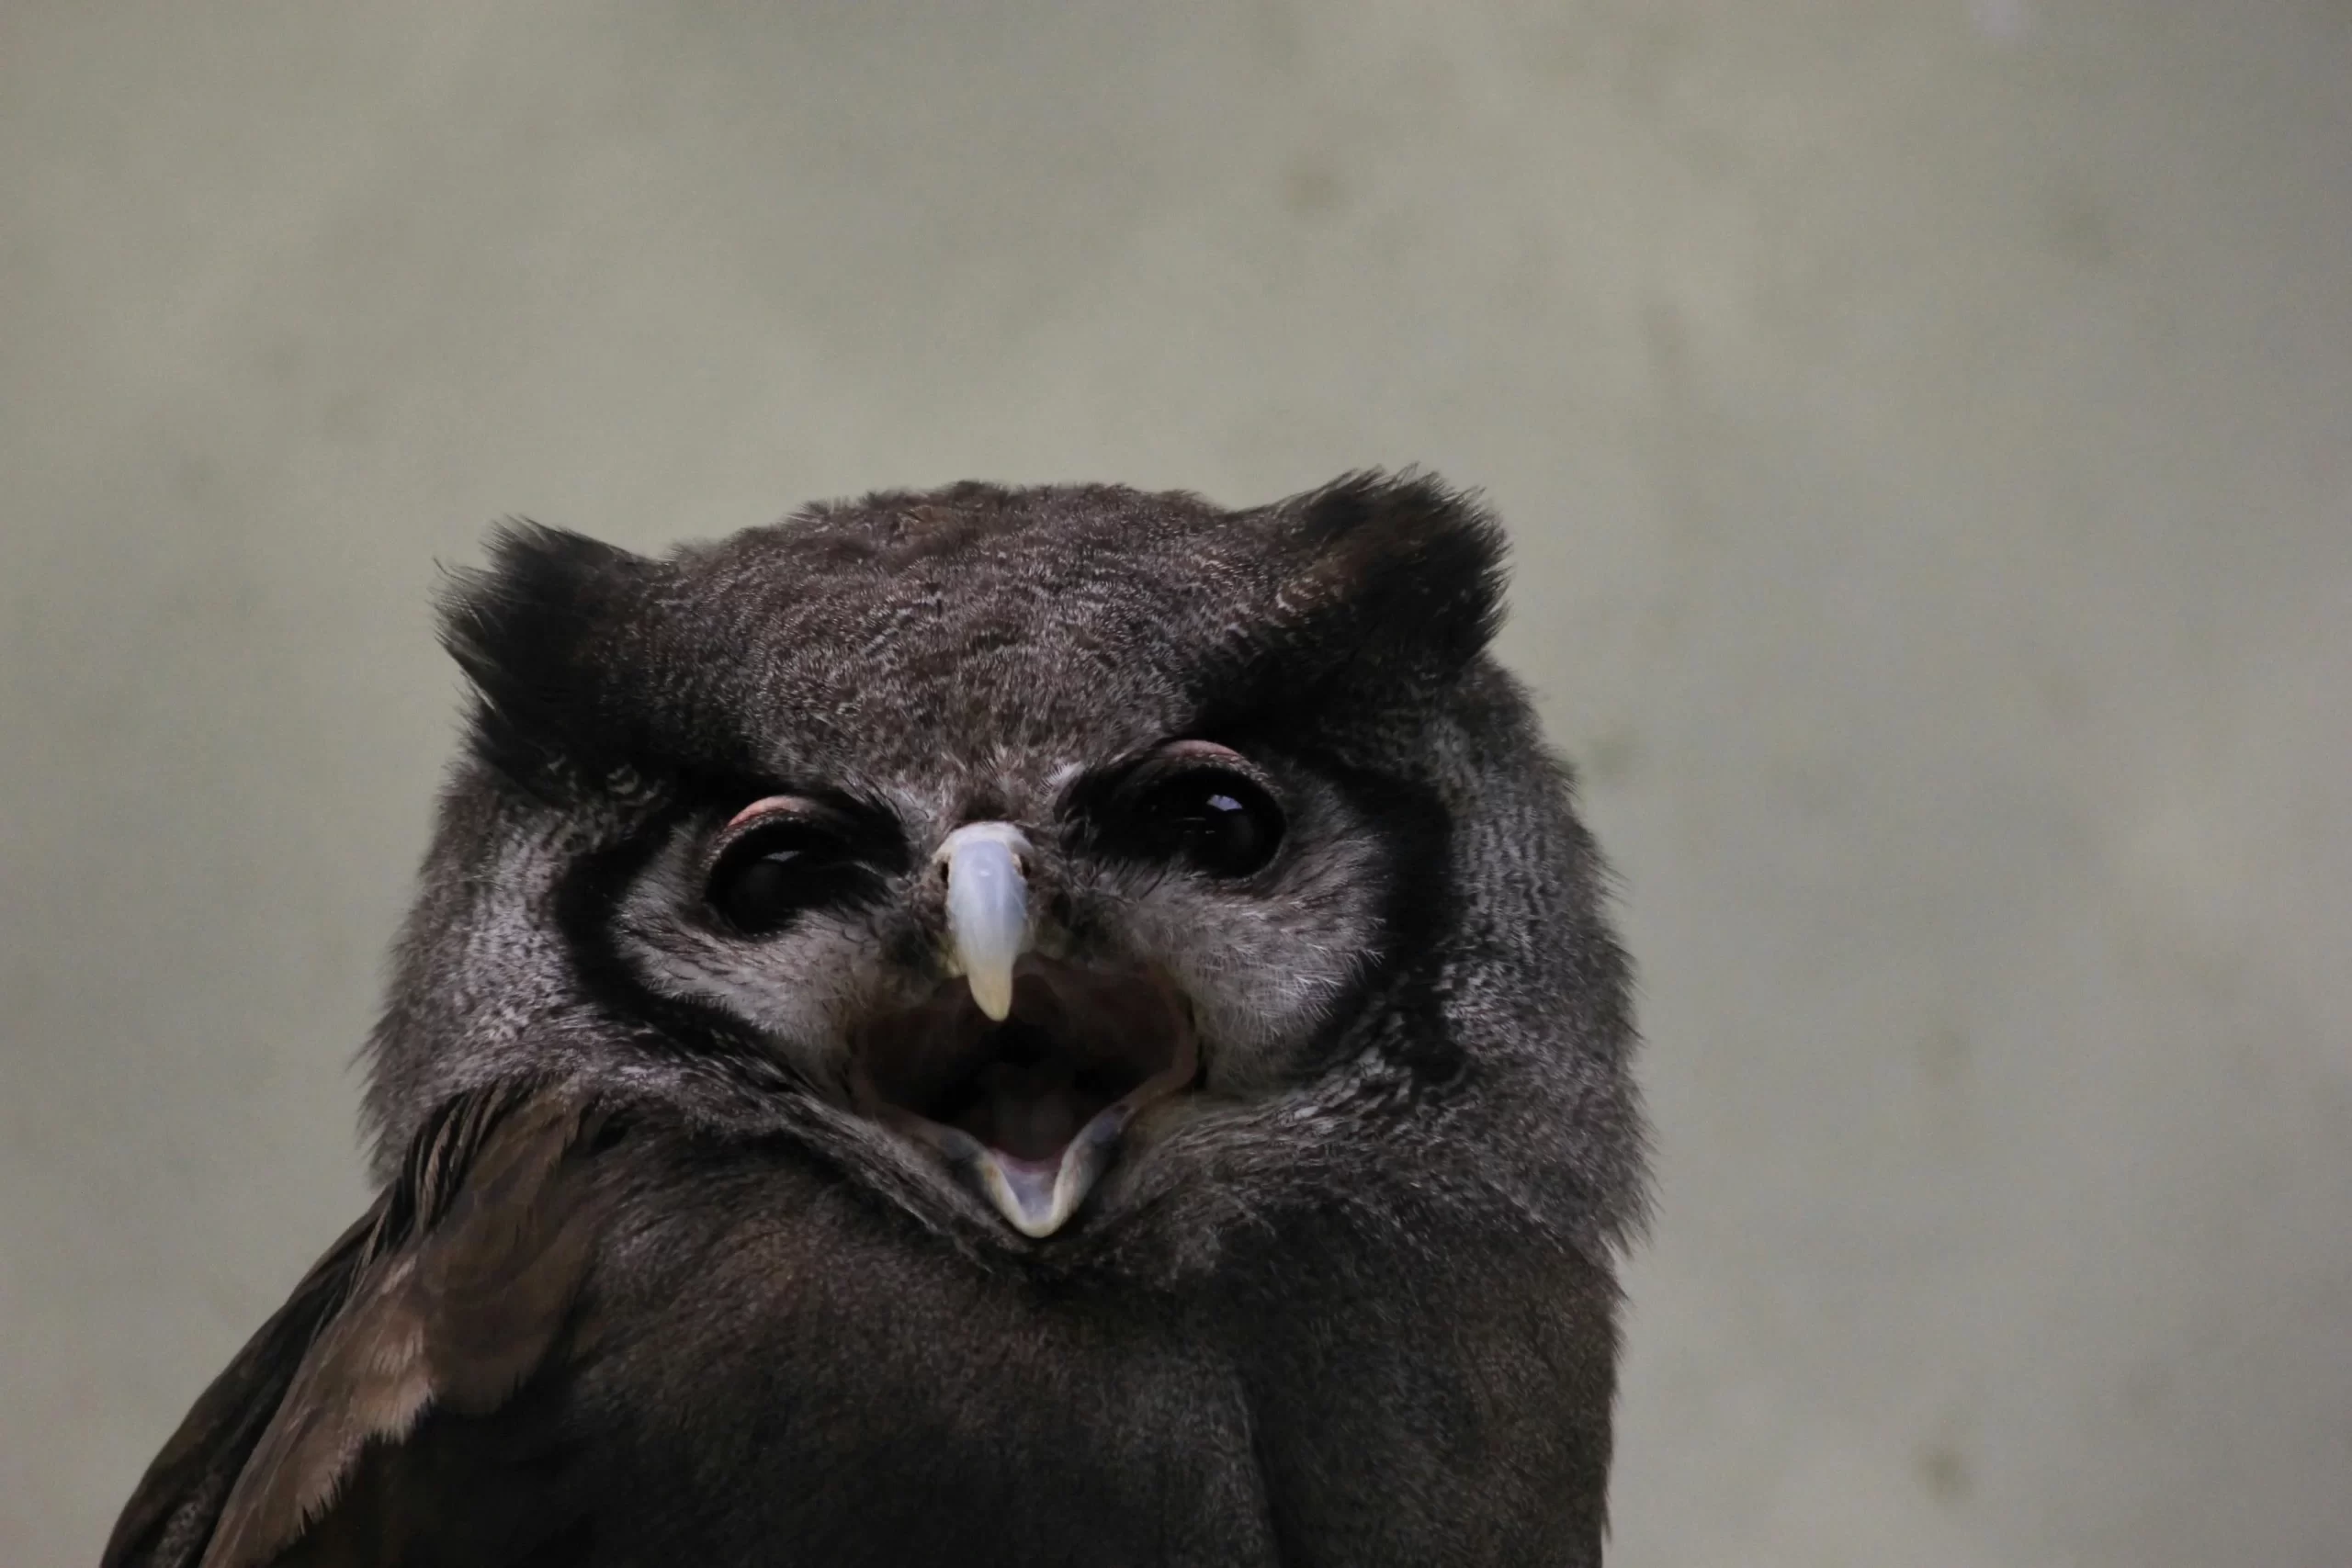 Why do owls hoot at night? Here, an owl open its mouth and prepares to hoot.